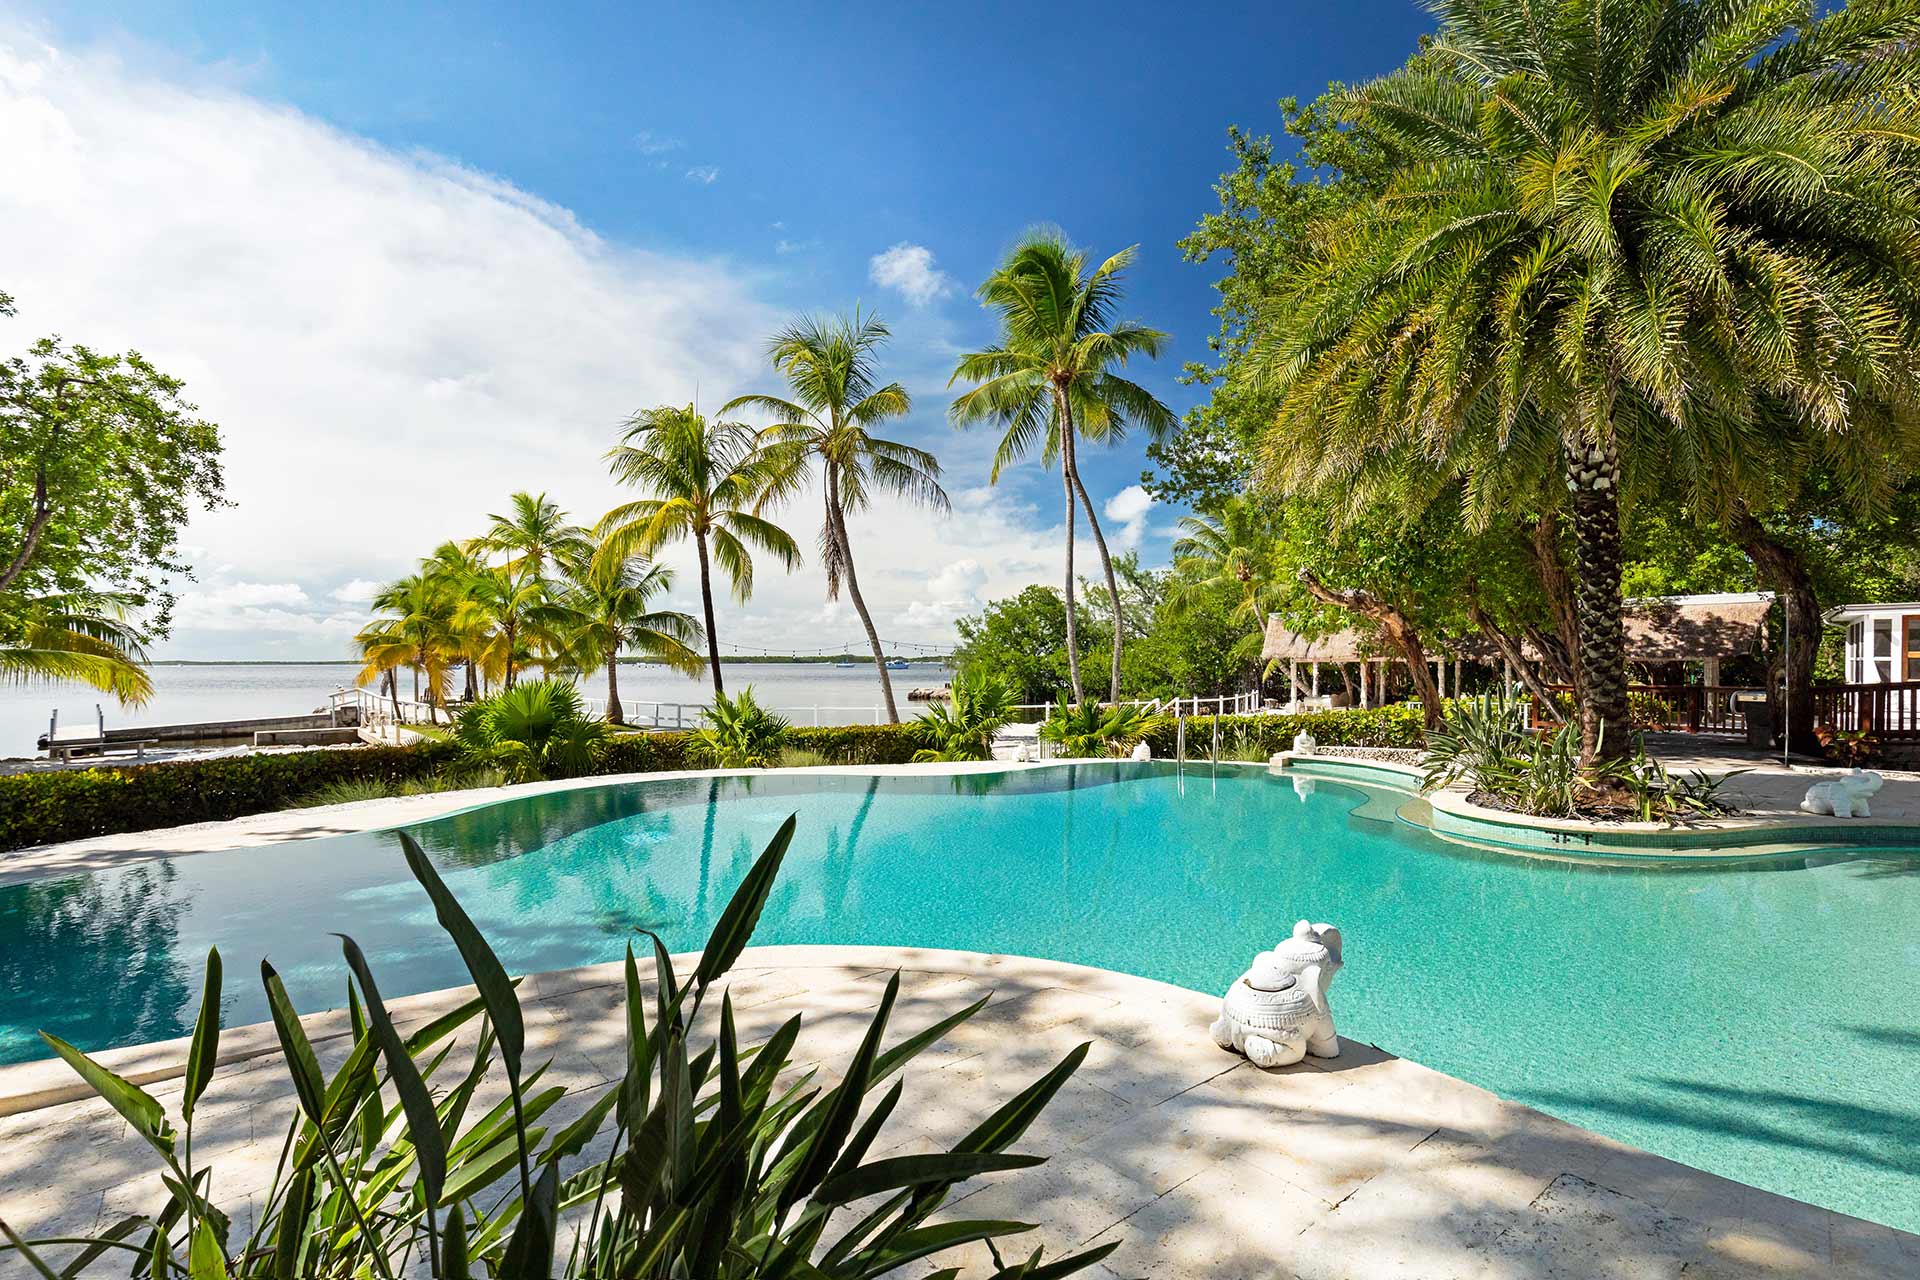 Infinity pool surrounded by lush greenery, overlooking the ocean at Largo Resort